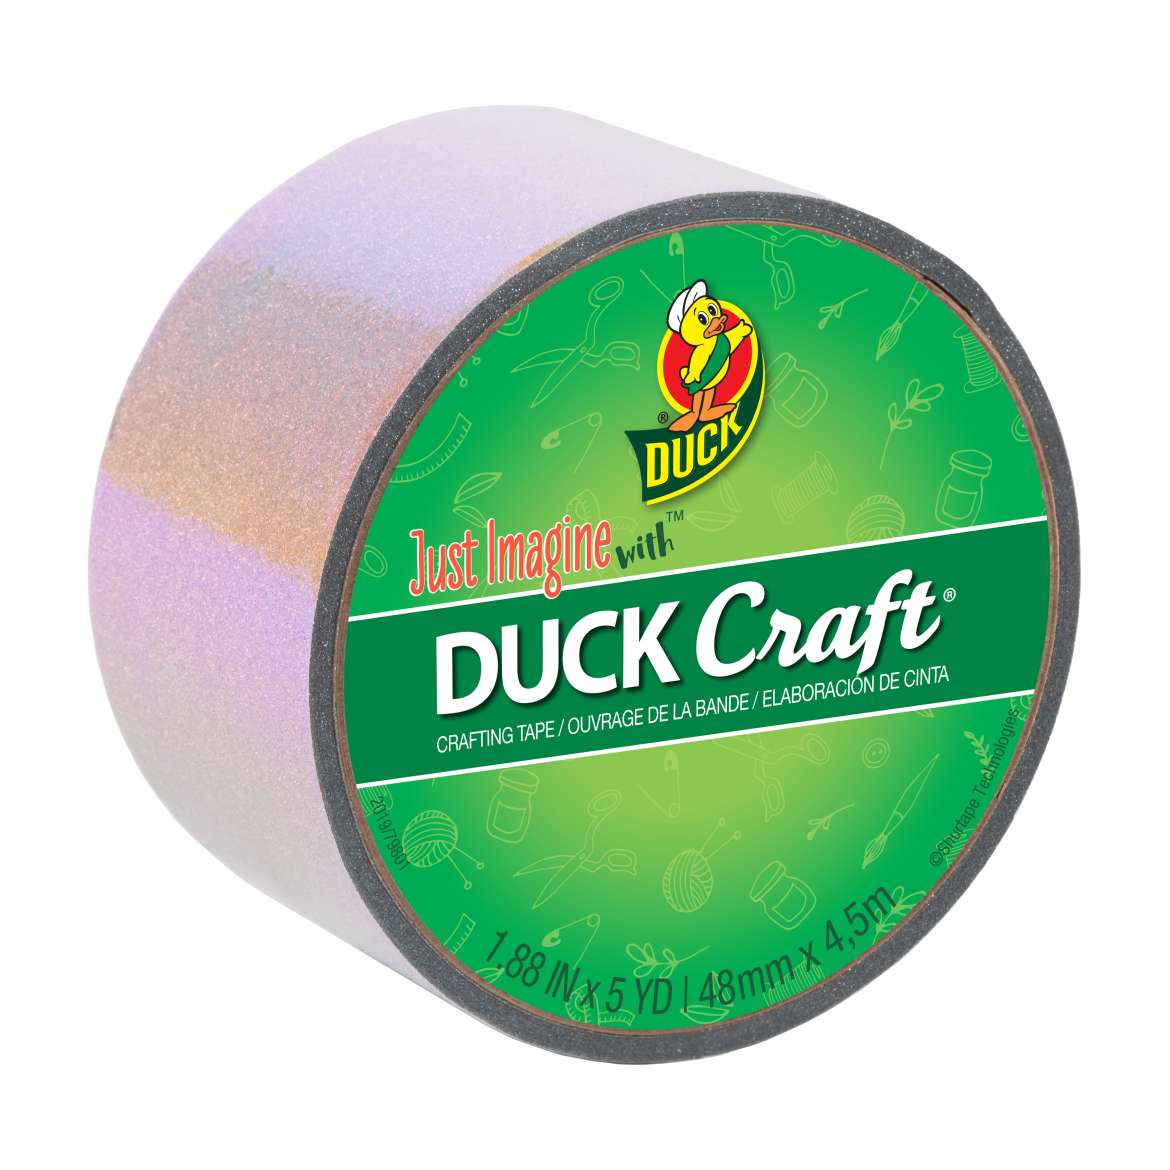 Duck Mirror® Crafting Tape Image